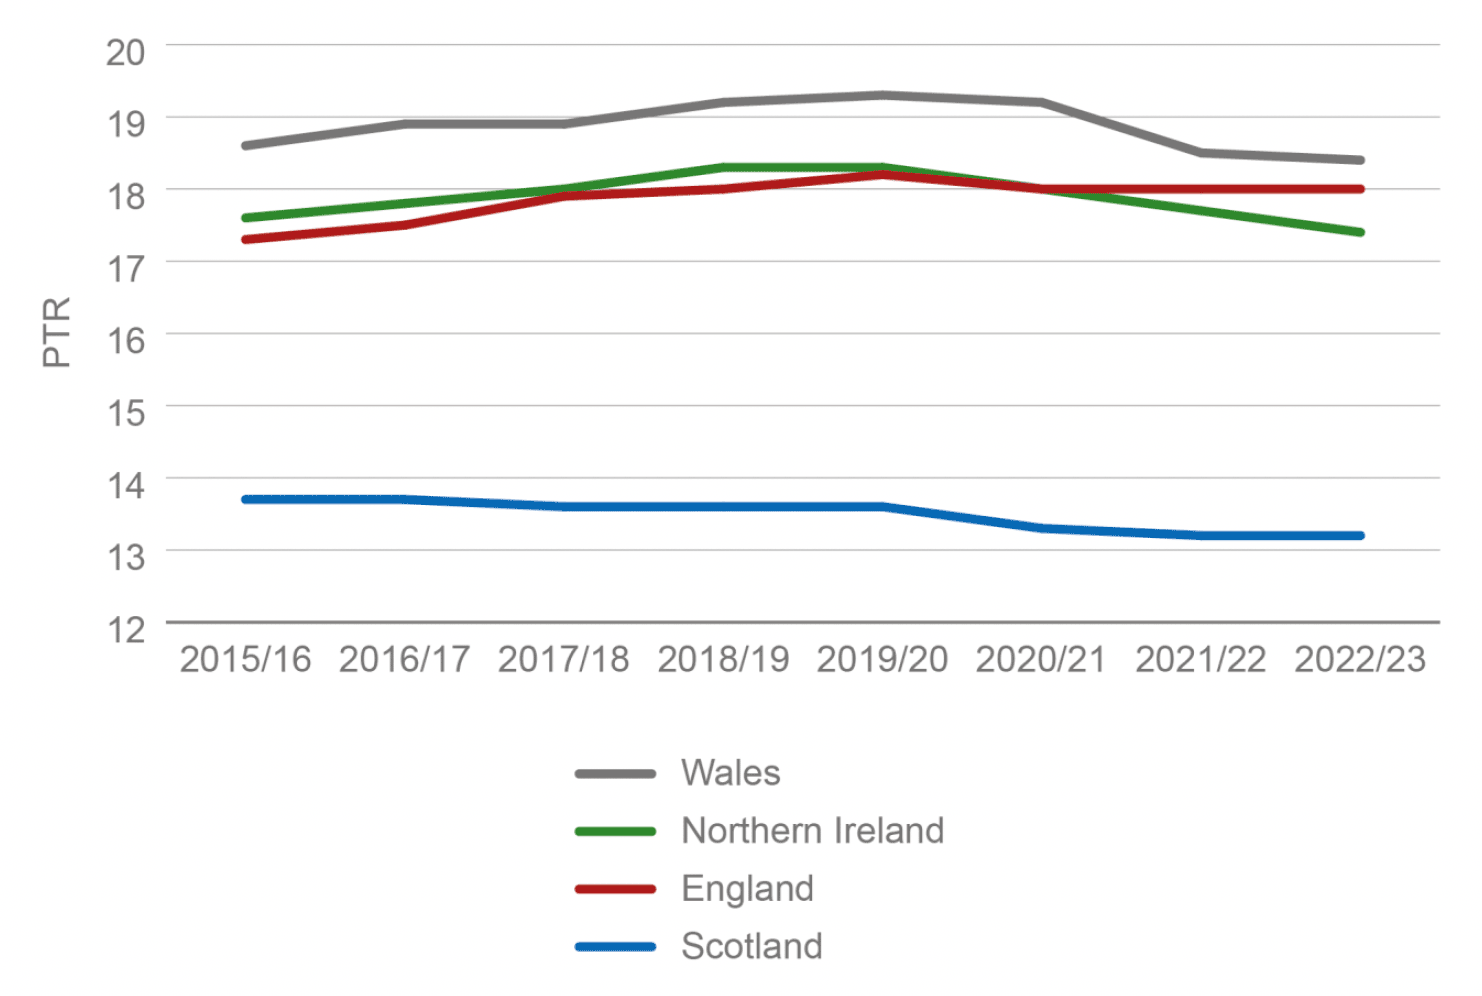 Four lines showing historic PTRs in each of the UK's four nations. Scotland is shown to consistently have the lowest PTR of all the nations, whilst Wales consistently has the highest.